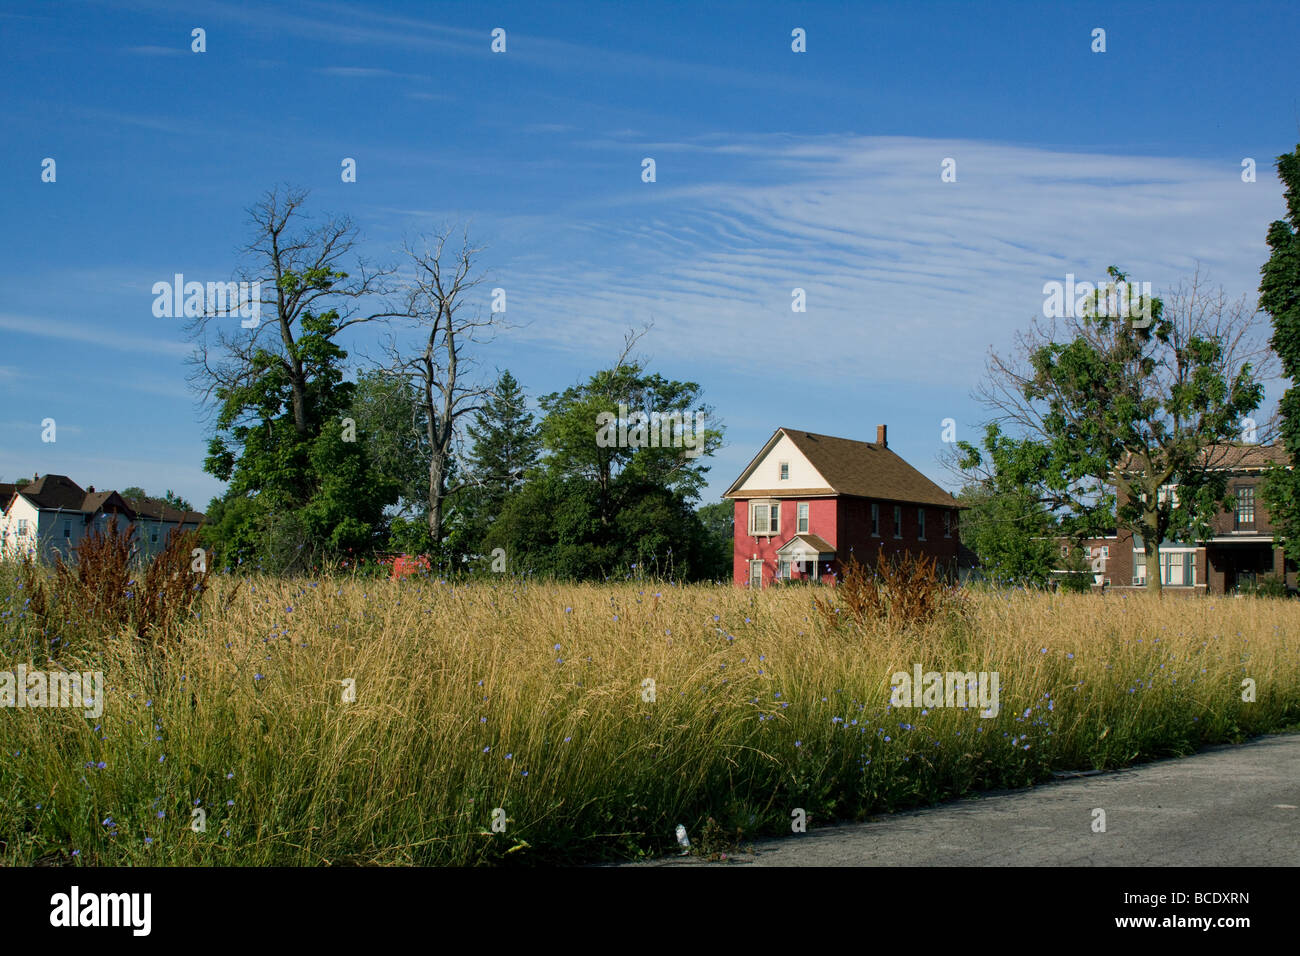 Vacant dwellings west side of Detroit Michigan July 2009 Stock Photo